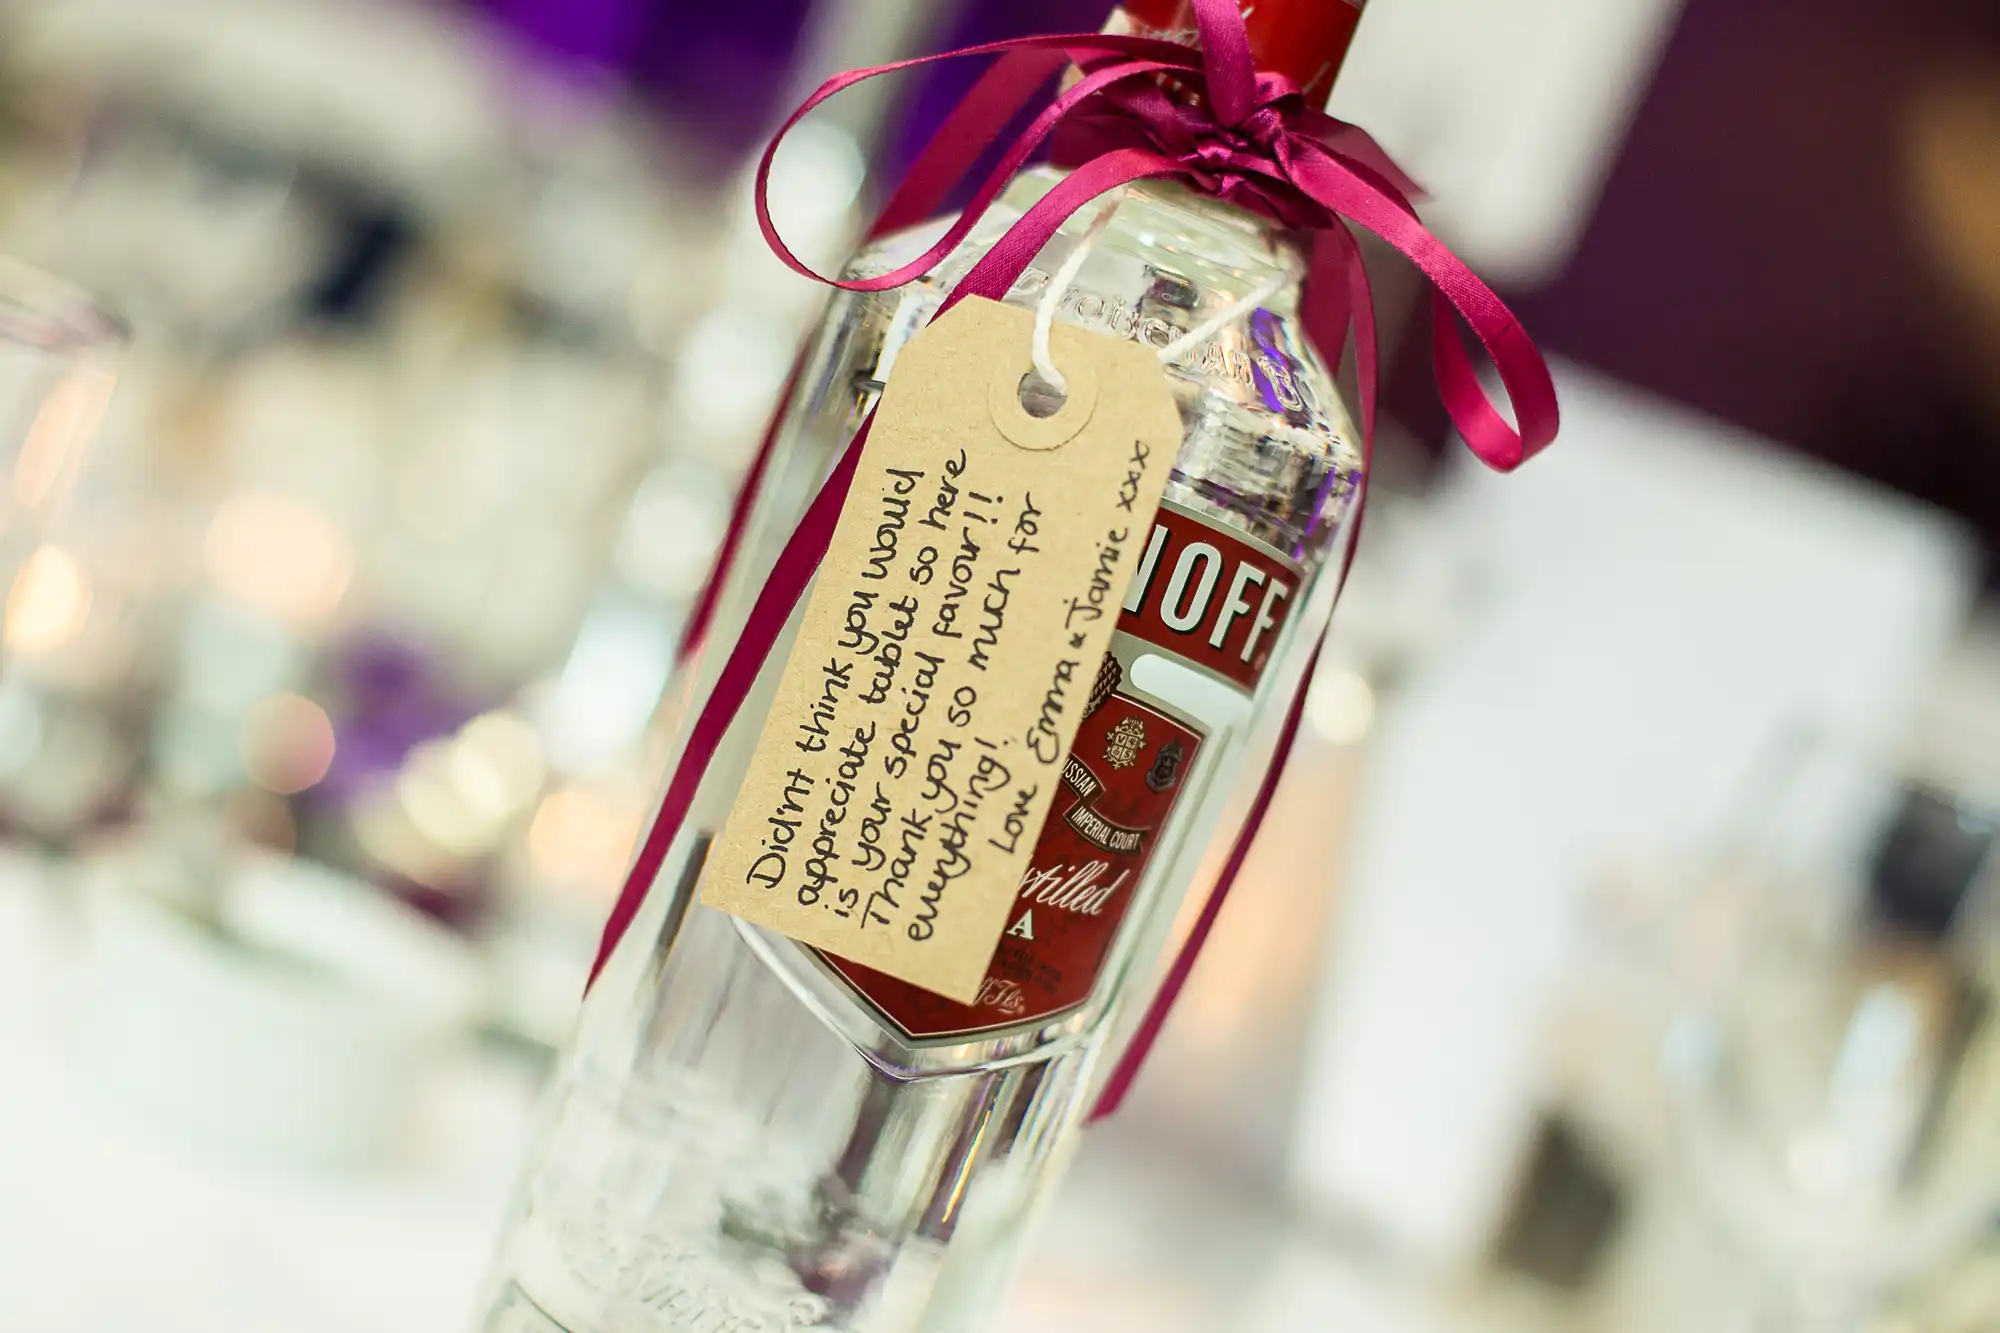 Close-up of a smirnoff vodka bottle with a custom handwritten label attached by a red ribbon, used as a wedding favor, on a festively decorated table.